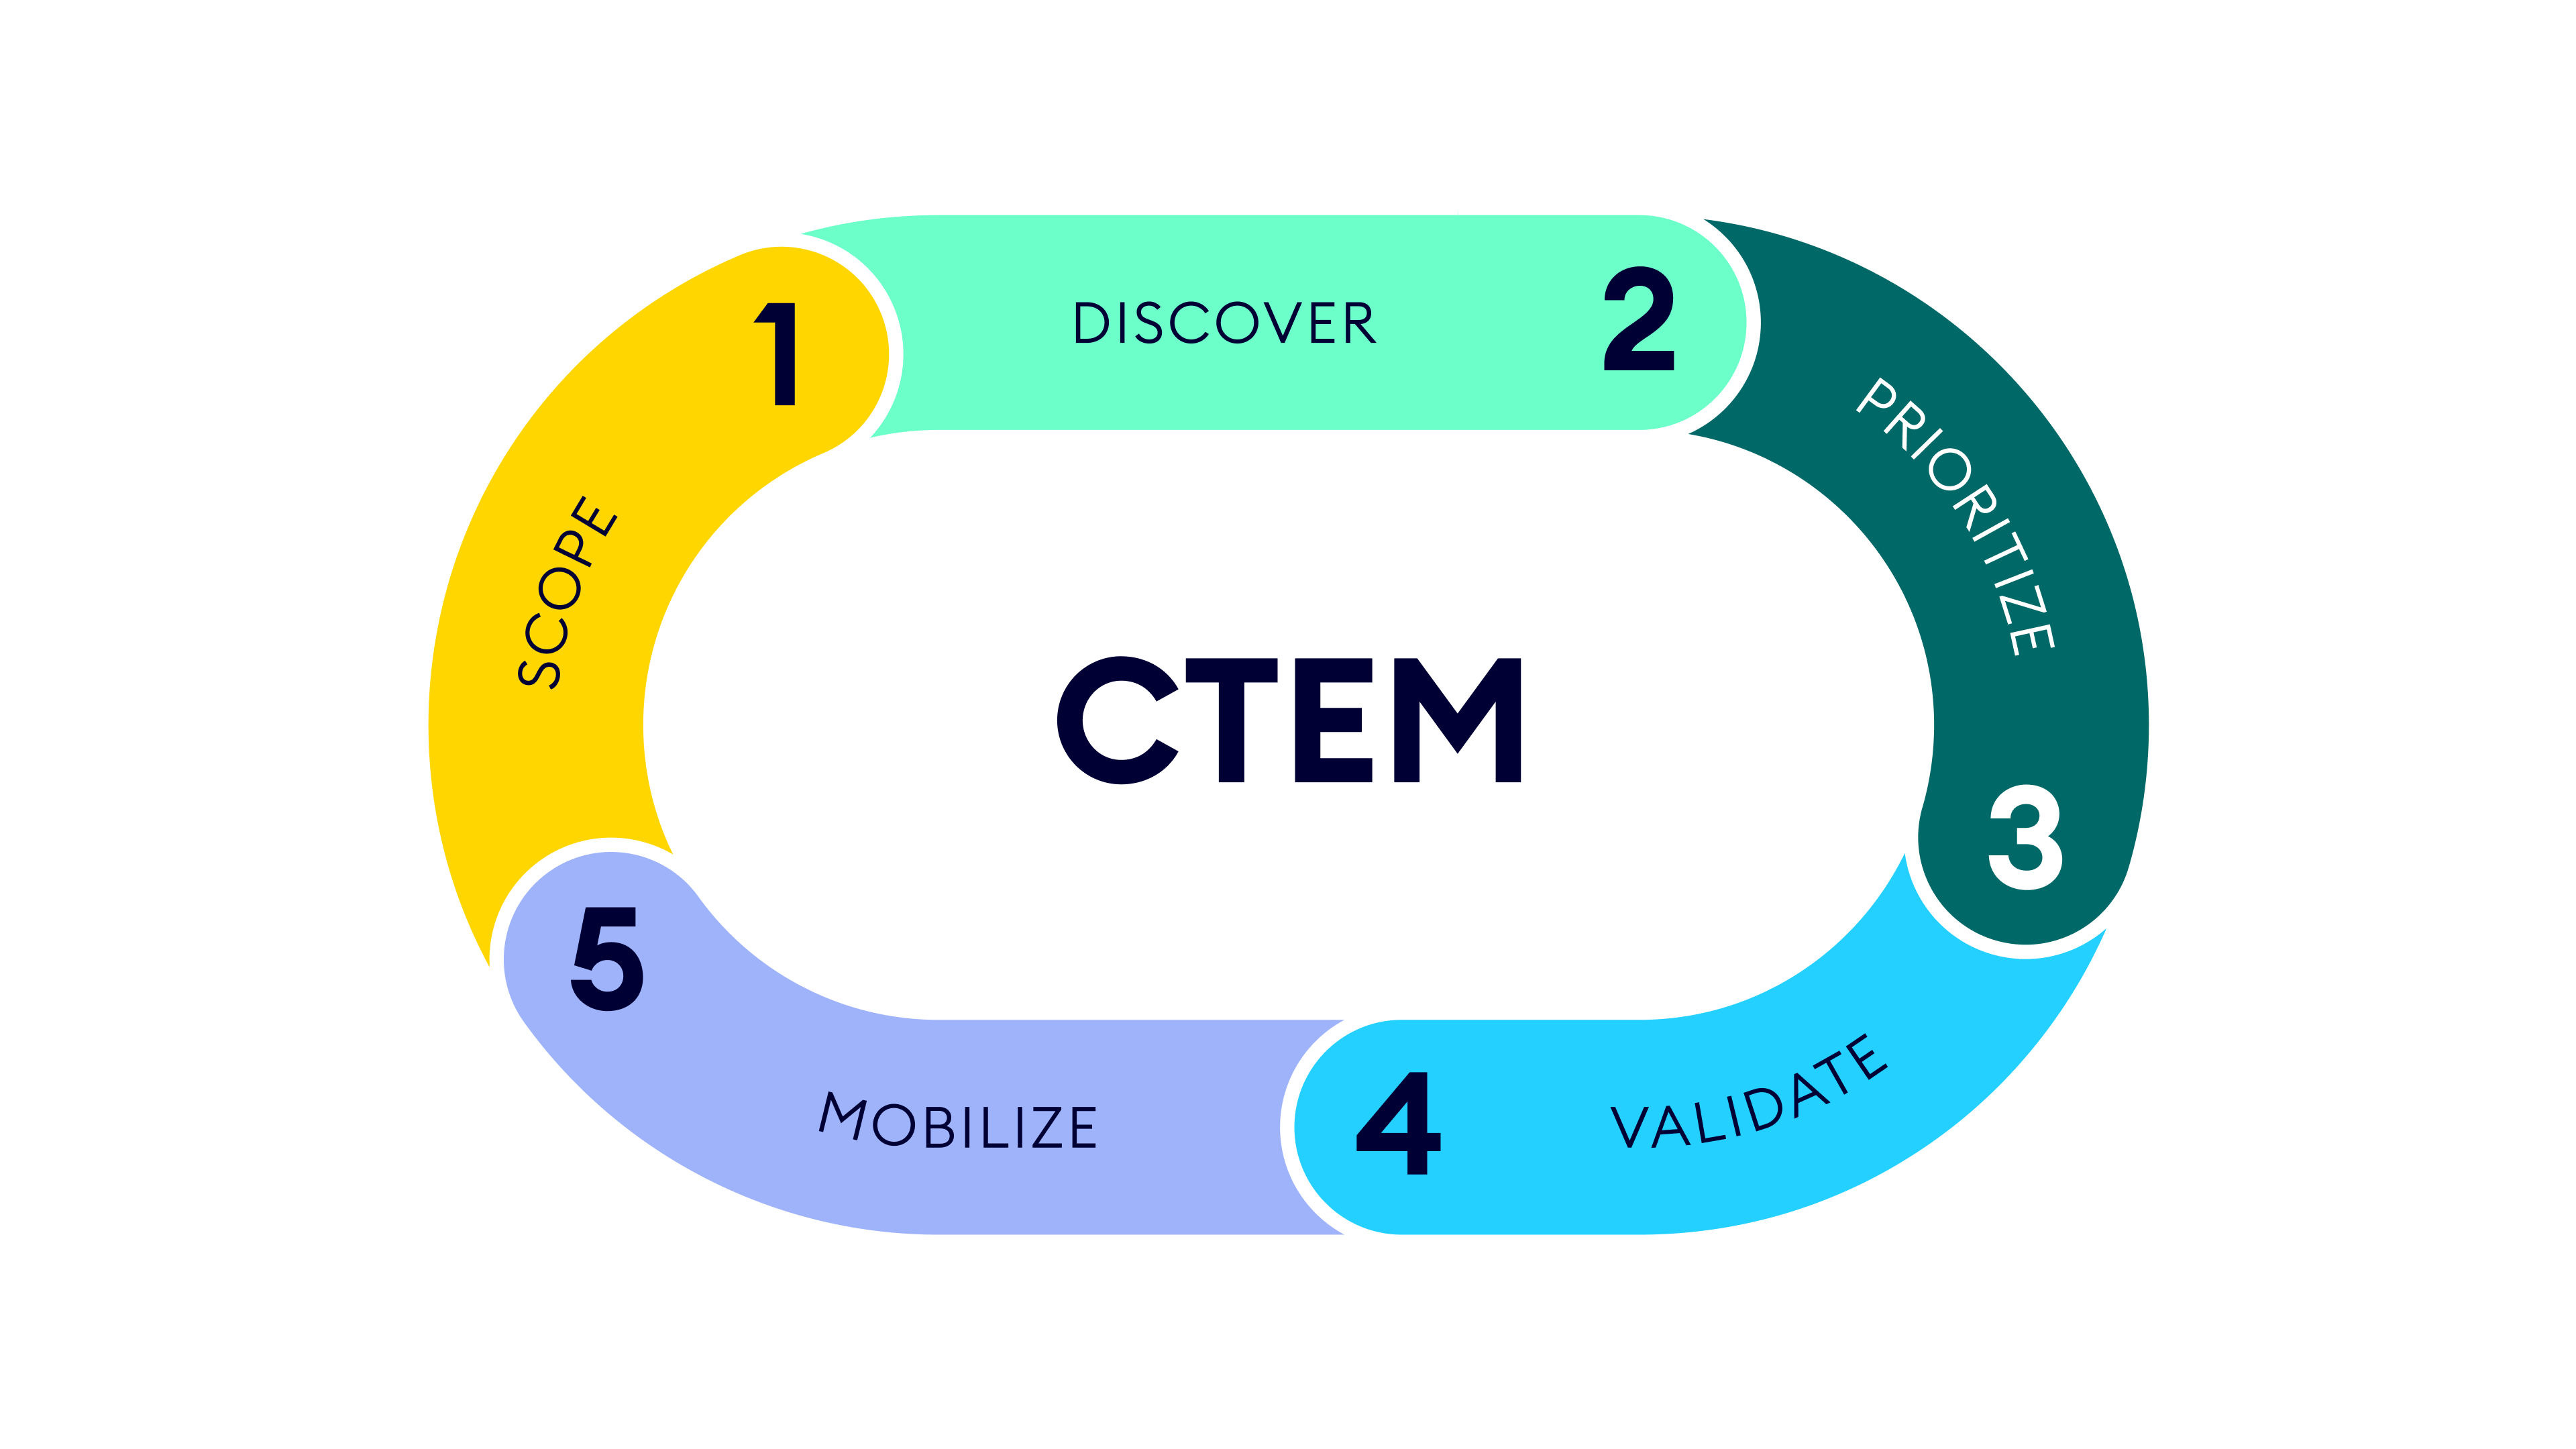 5 stages of CTEM